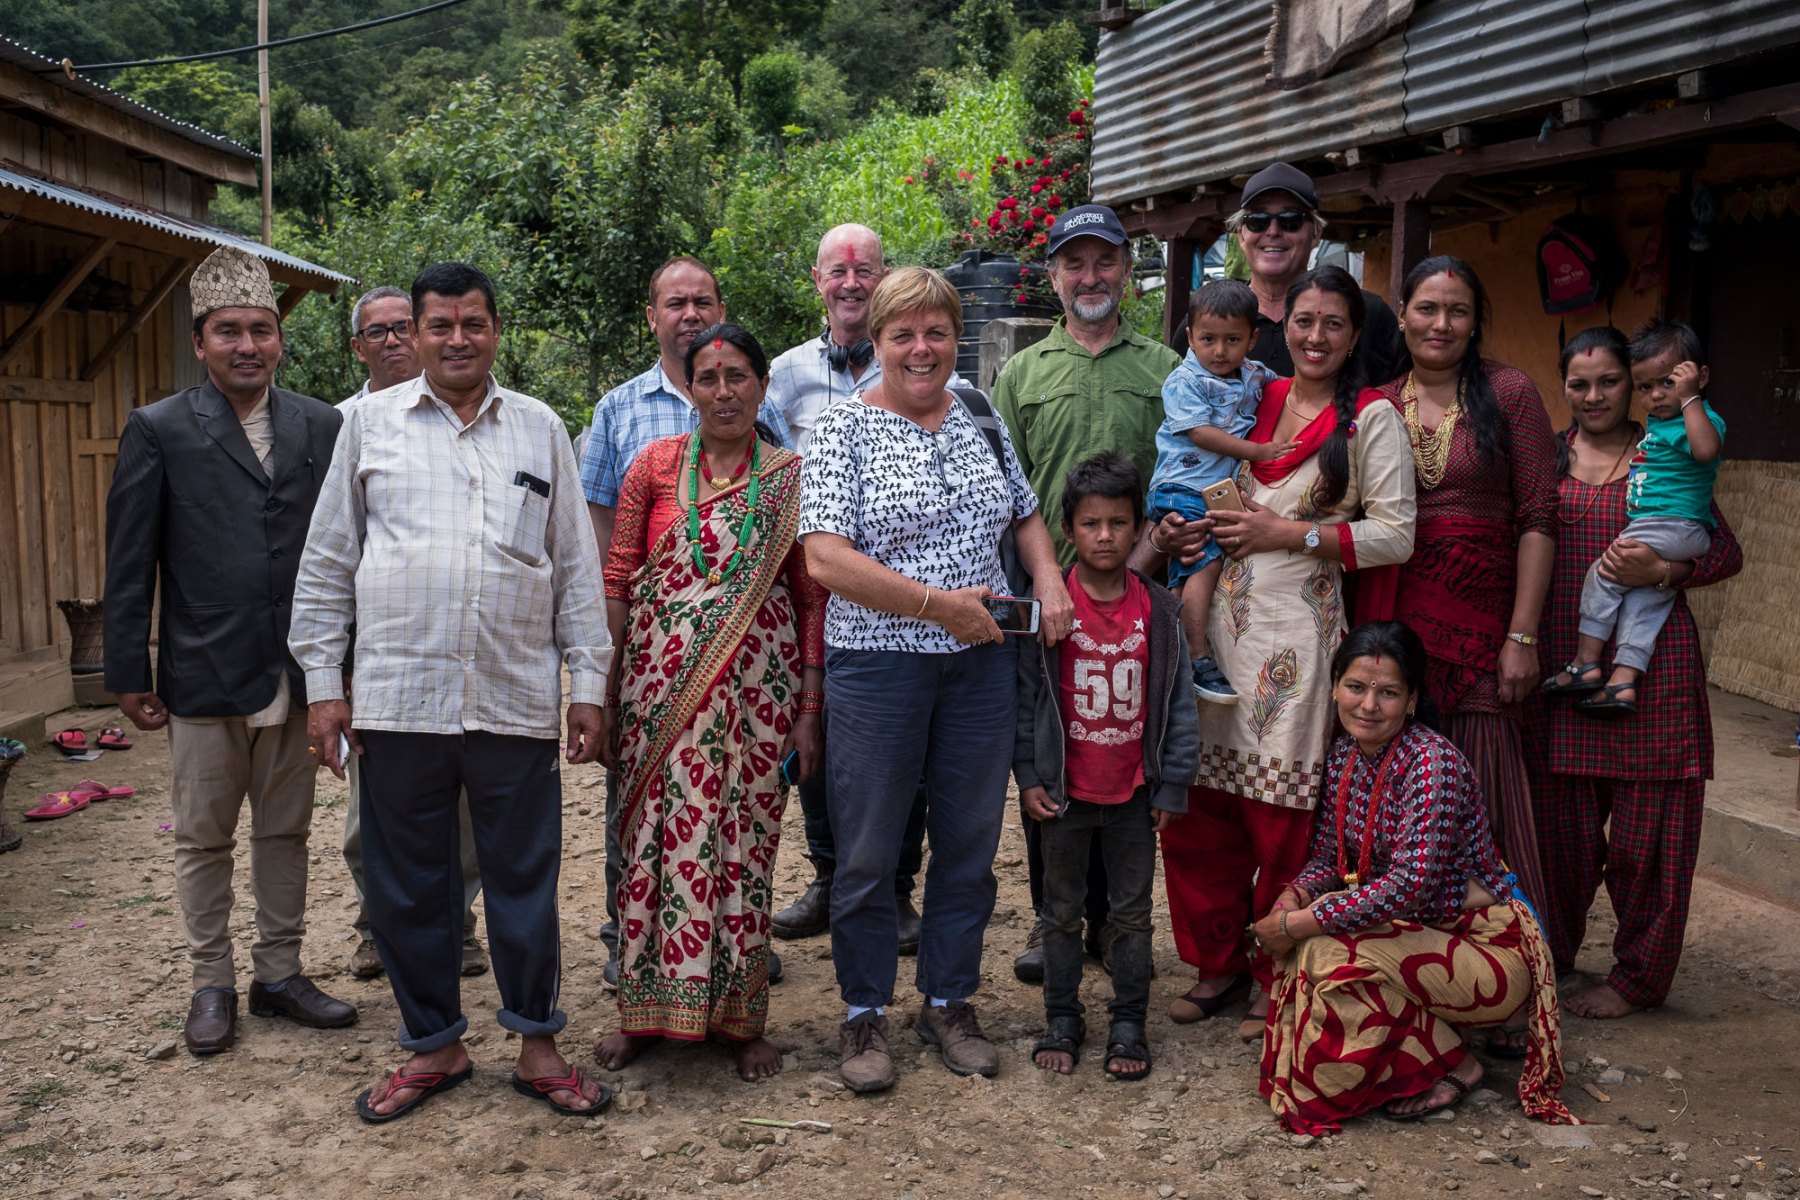 The final group photo before leaving Chaubas village, Kavre district, Nepal.